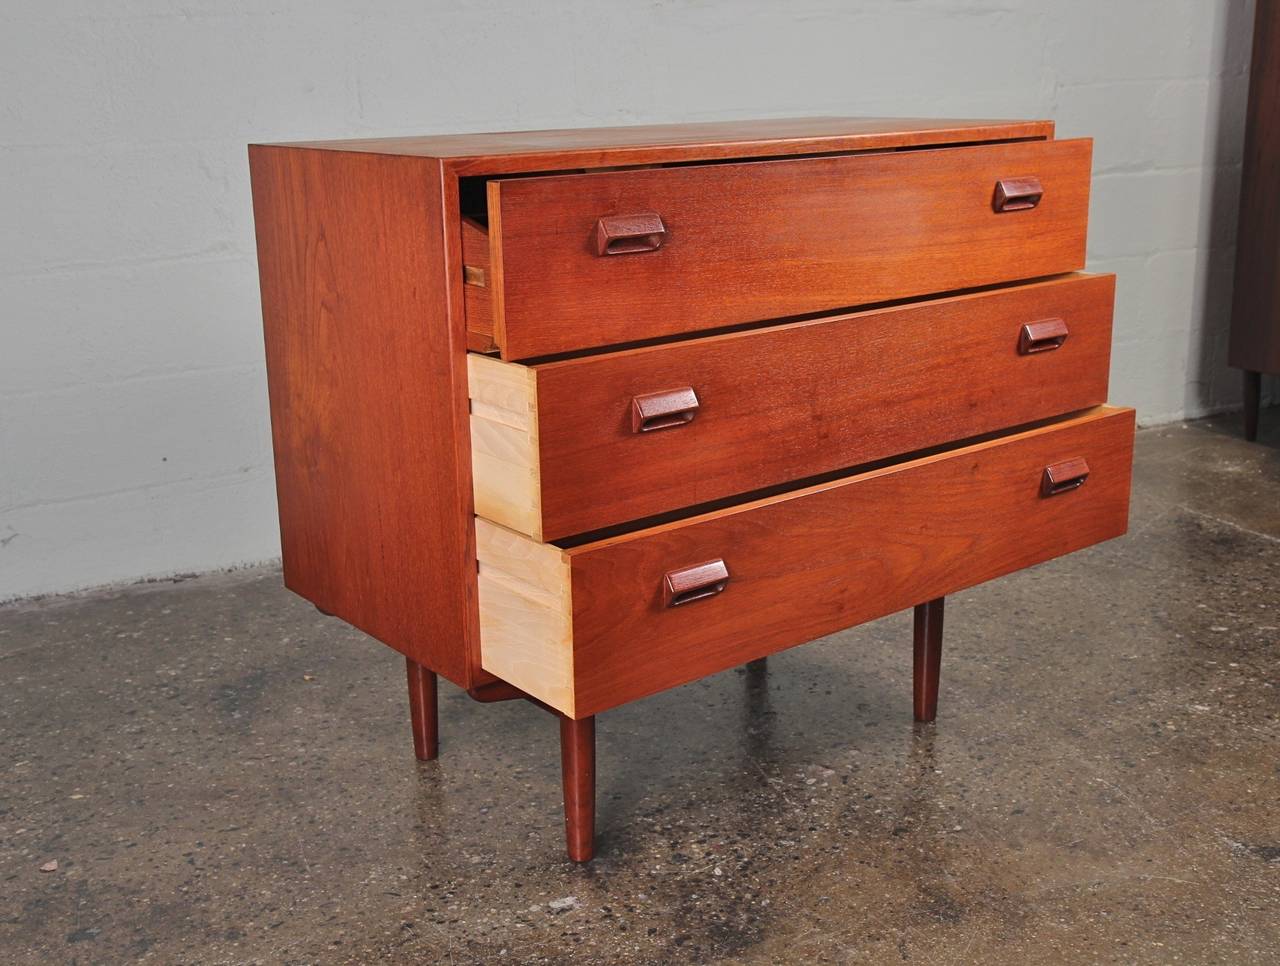 Lovely Danish modern teak vanity. The top drawer opens to reveal storage and a pull-out mirror. There are two more standard dresser drawers below. We have additional matching storage pieces that form a suite: a tall boy and a four-drawer dresser.